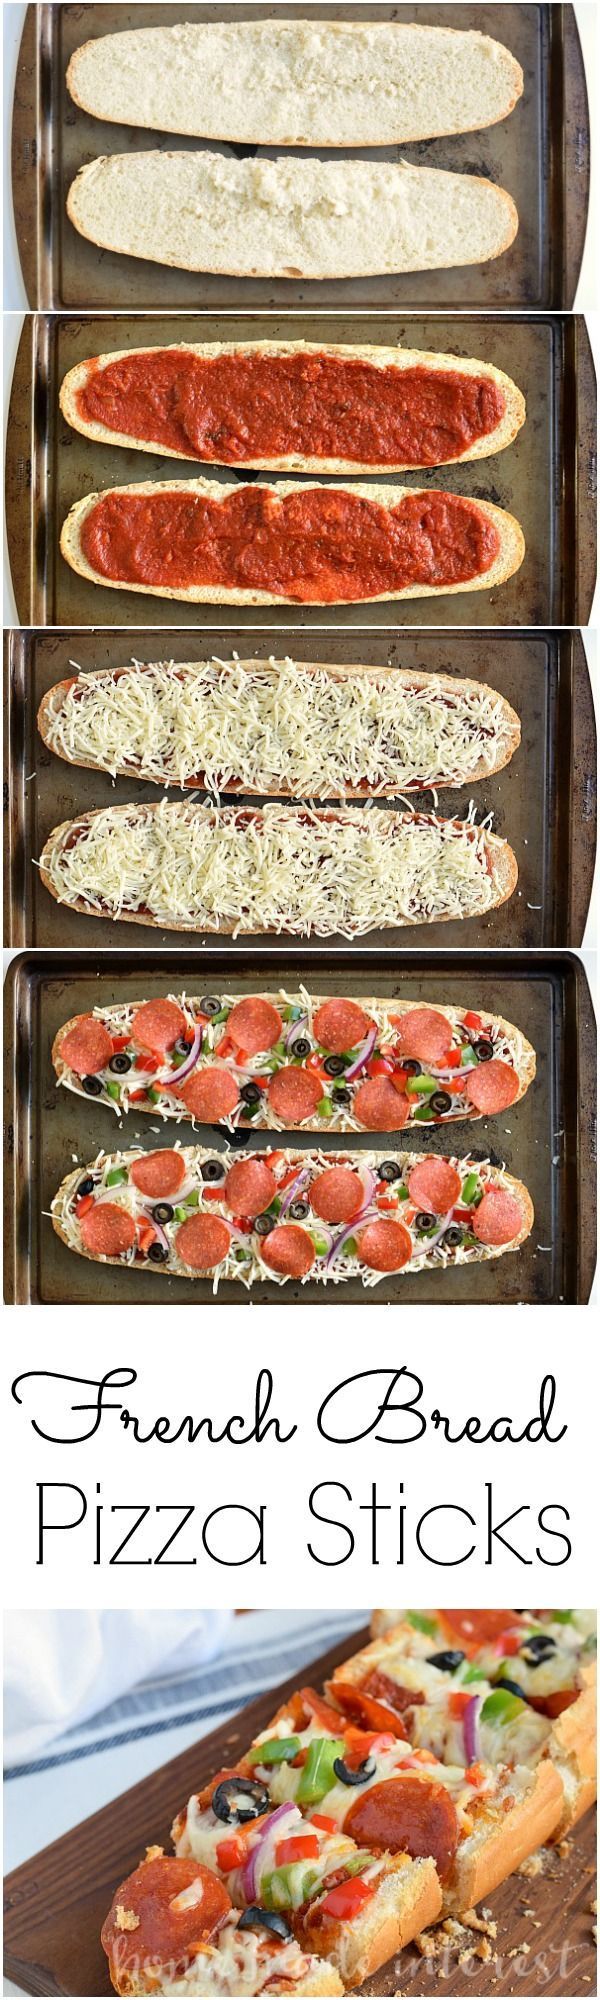 Make your french bread pizza with all of your favorite toppings then cut it into strips and serve it at your next party as an easy